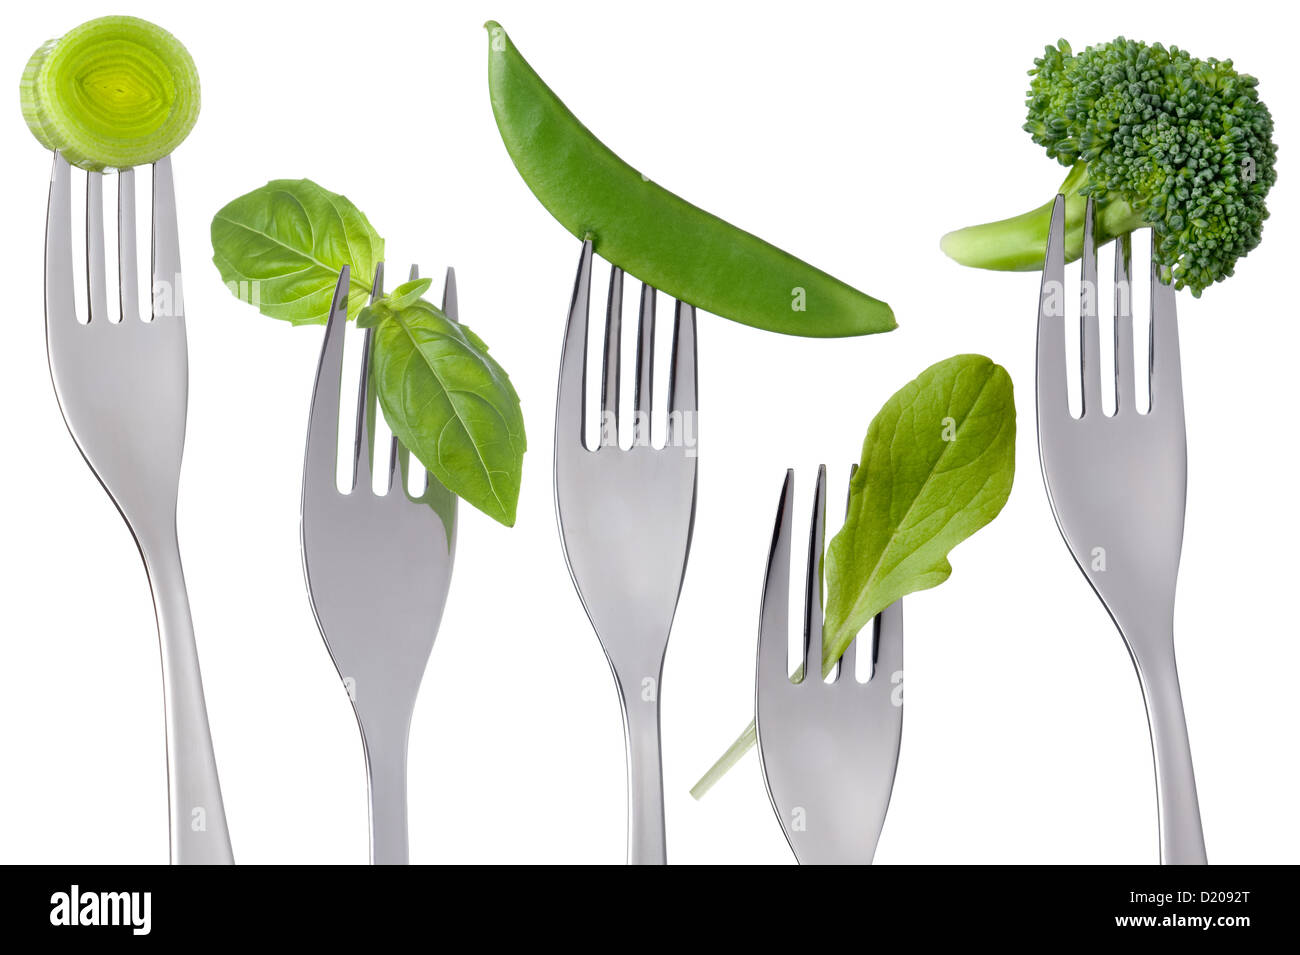 healthy raw green vegetables food on forks isolated against white: leek, basil, mange tout, lettuce, broccoli Stock Photo